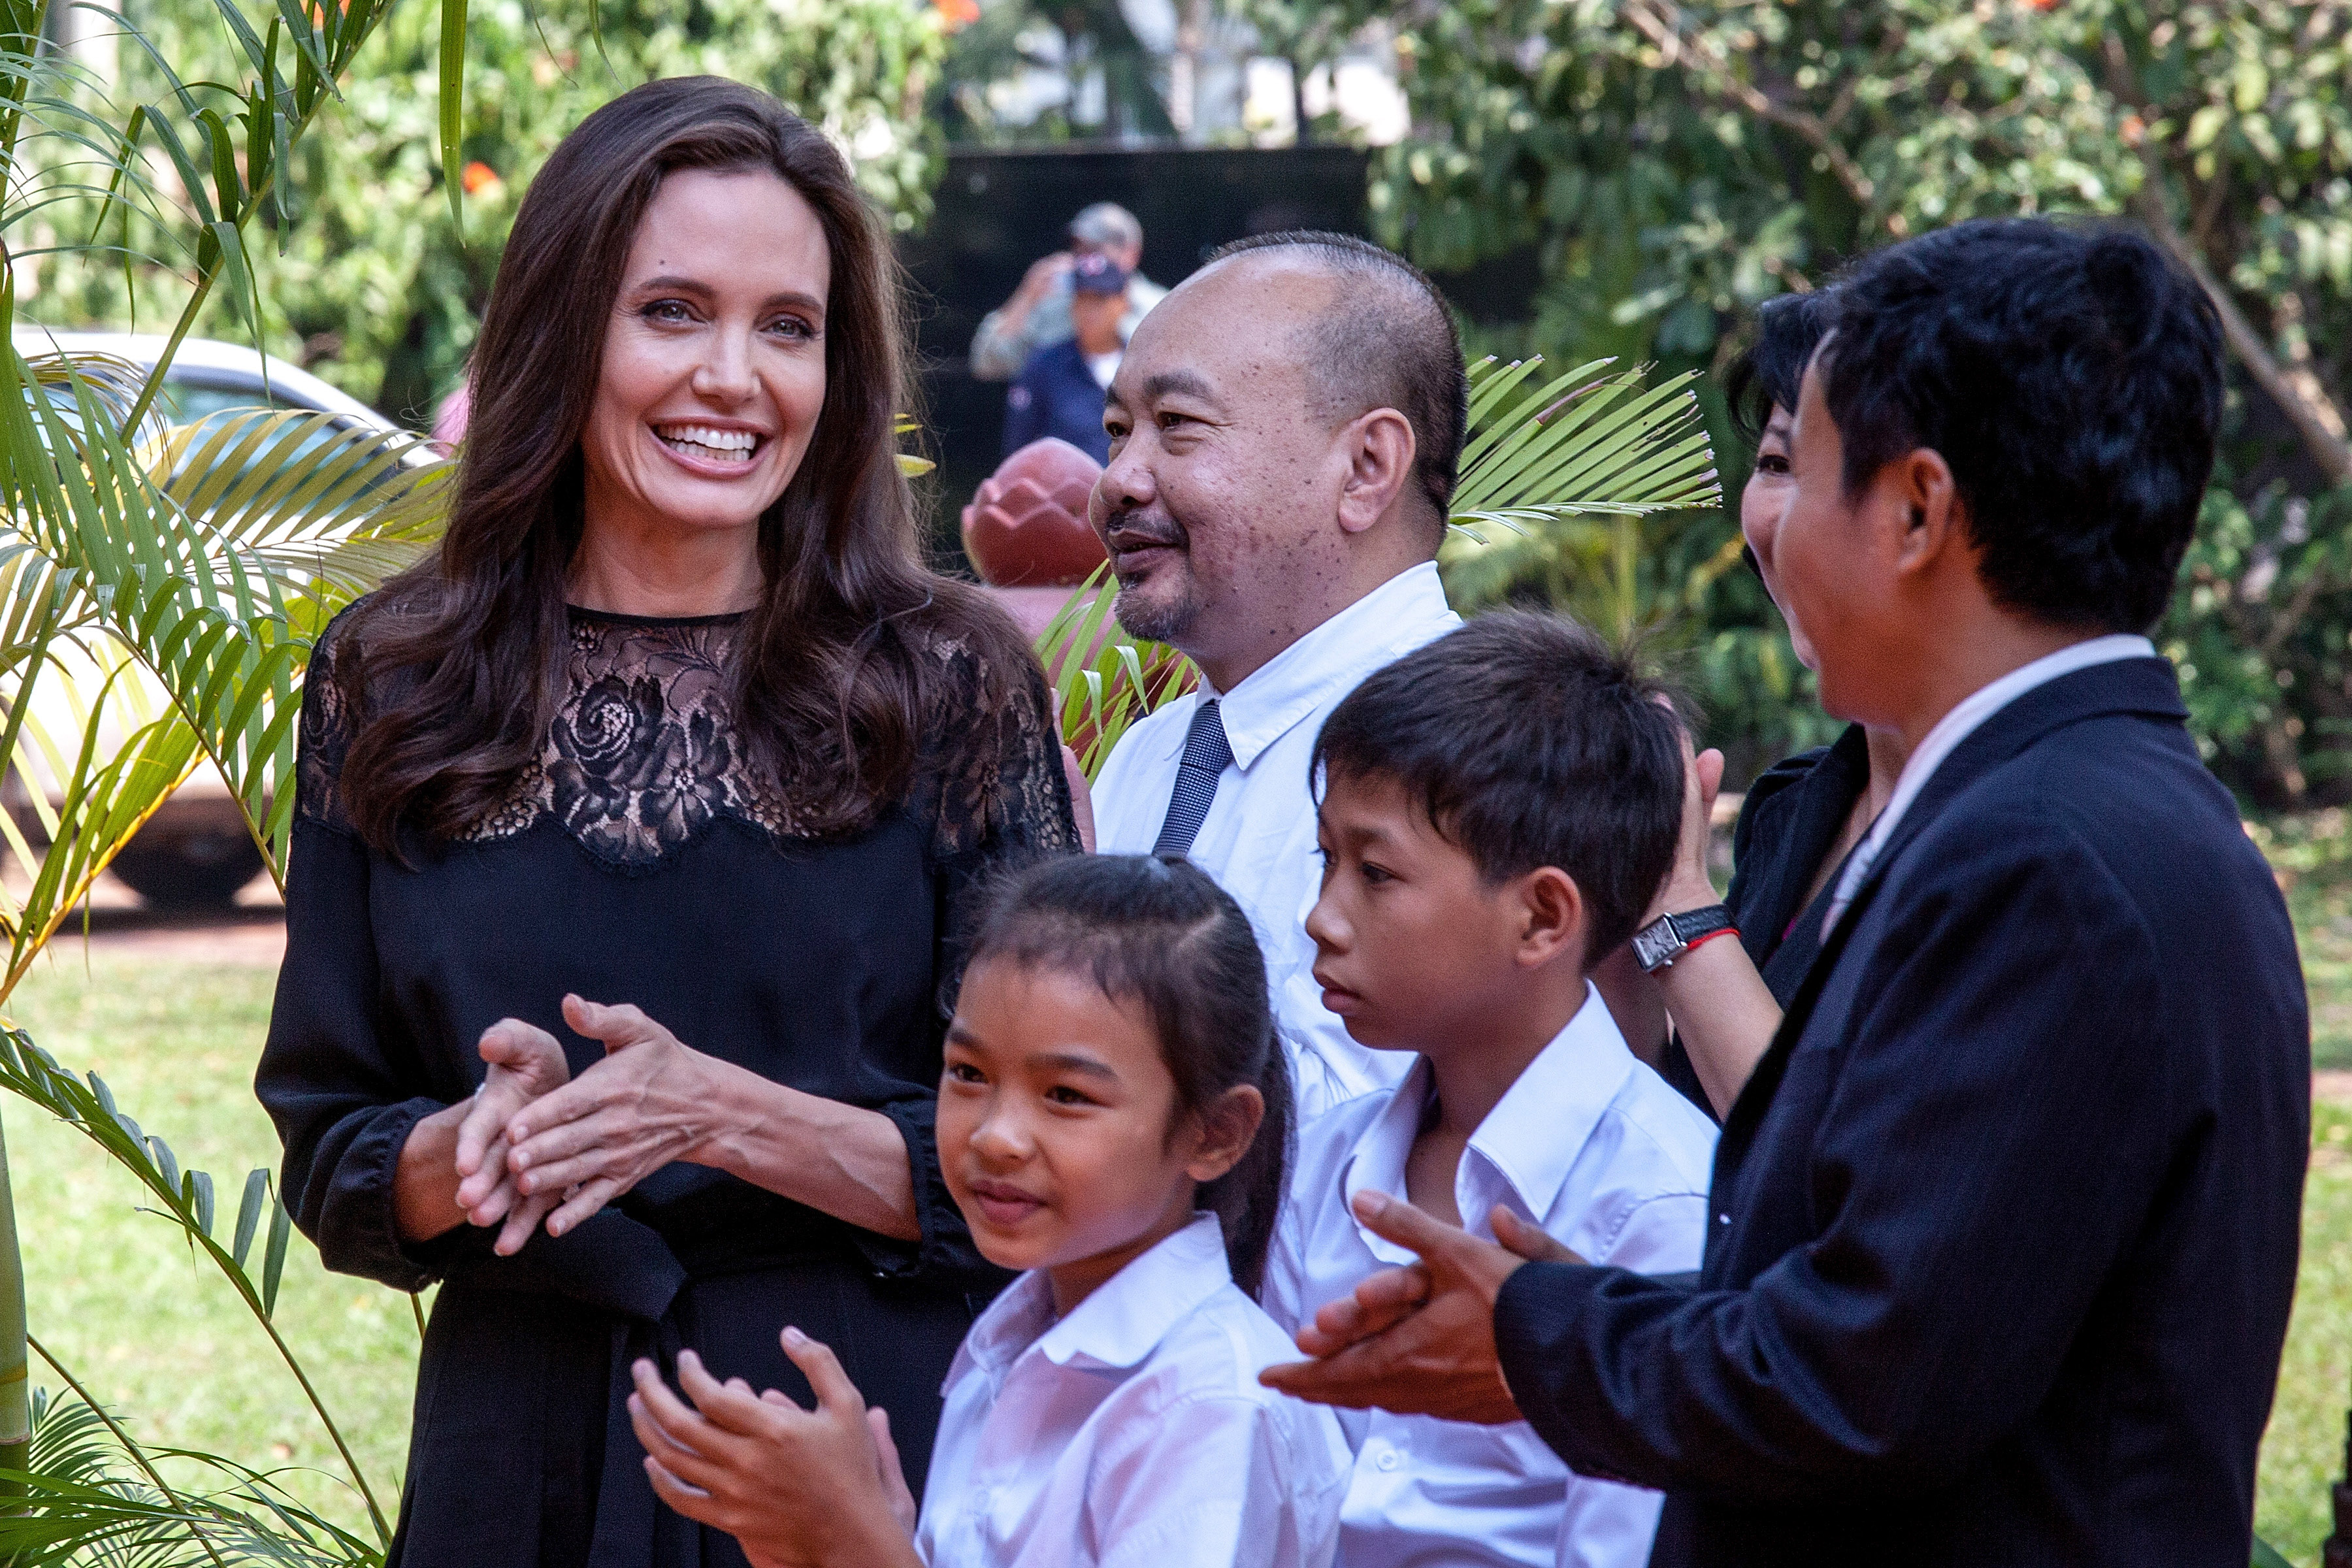 Angelina Jolie Attends "First They Killed My Father" Premiere In Cambodia